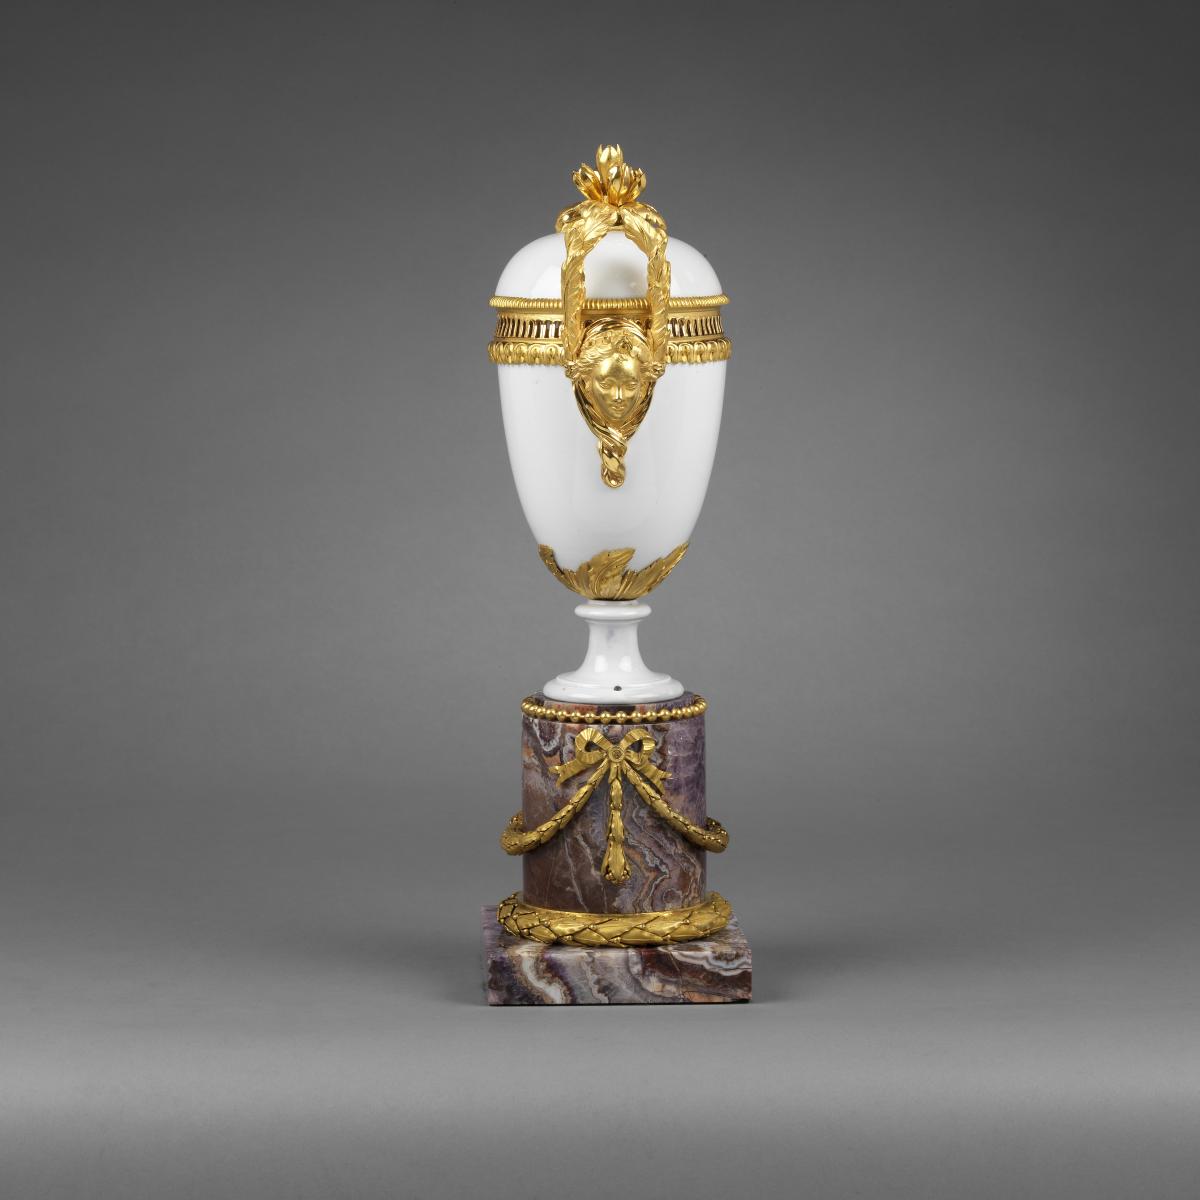 A Pair of Louis XVI Ormolu-Mounted White Locre Porcelain Vases and Covers Resting on later Amethyst Bases. Circa 1775